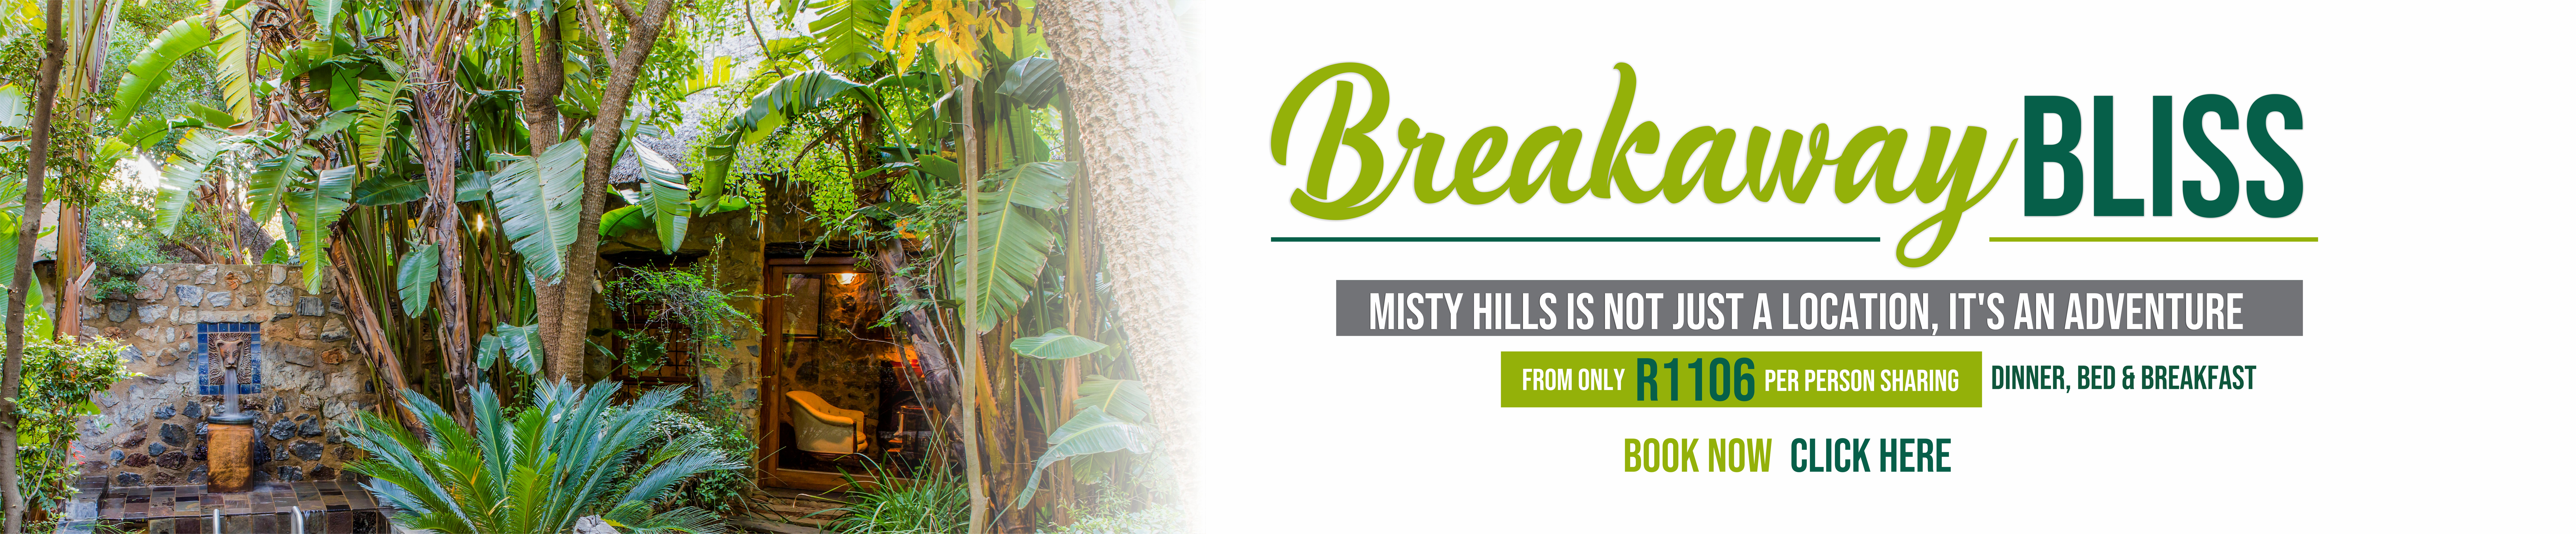 Misty Hills Country Hotel Cradle of Humankind Experience including Maropeng, Lion Park Safari Tours